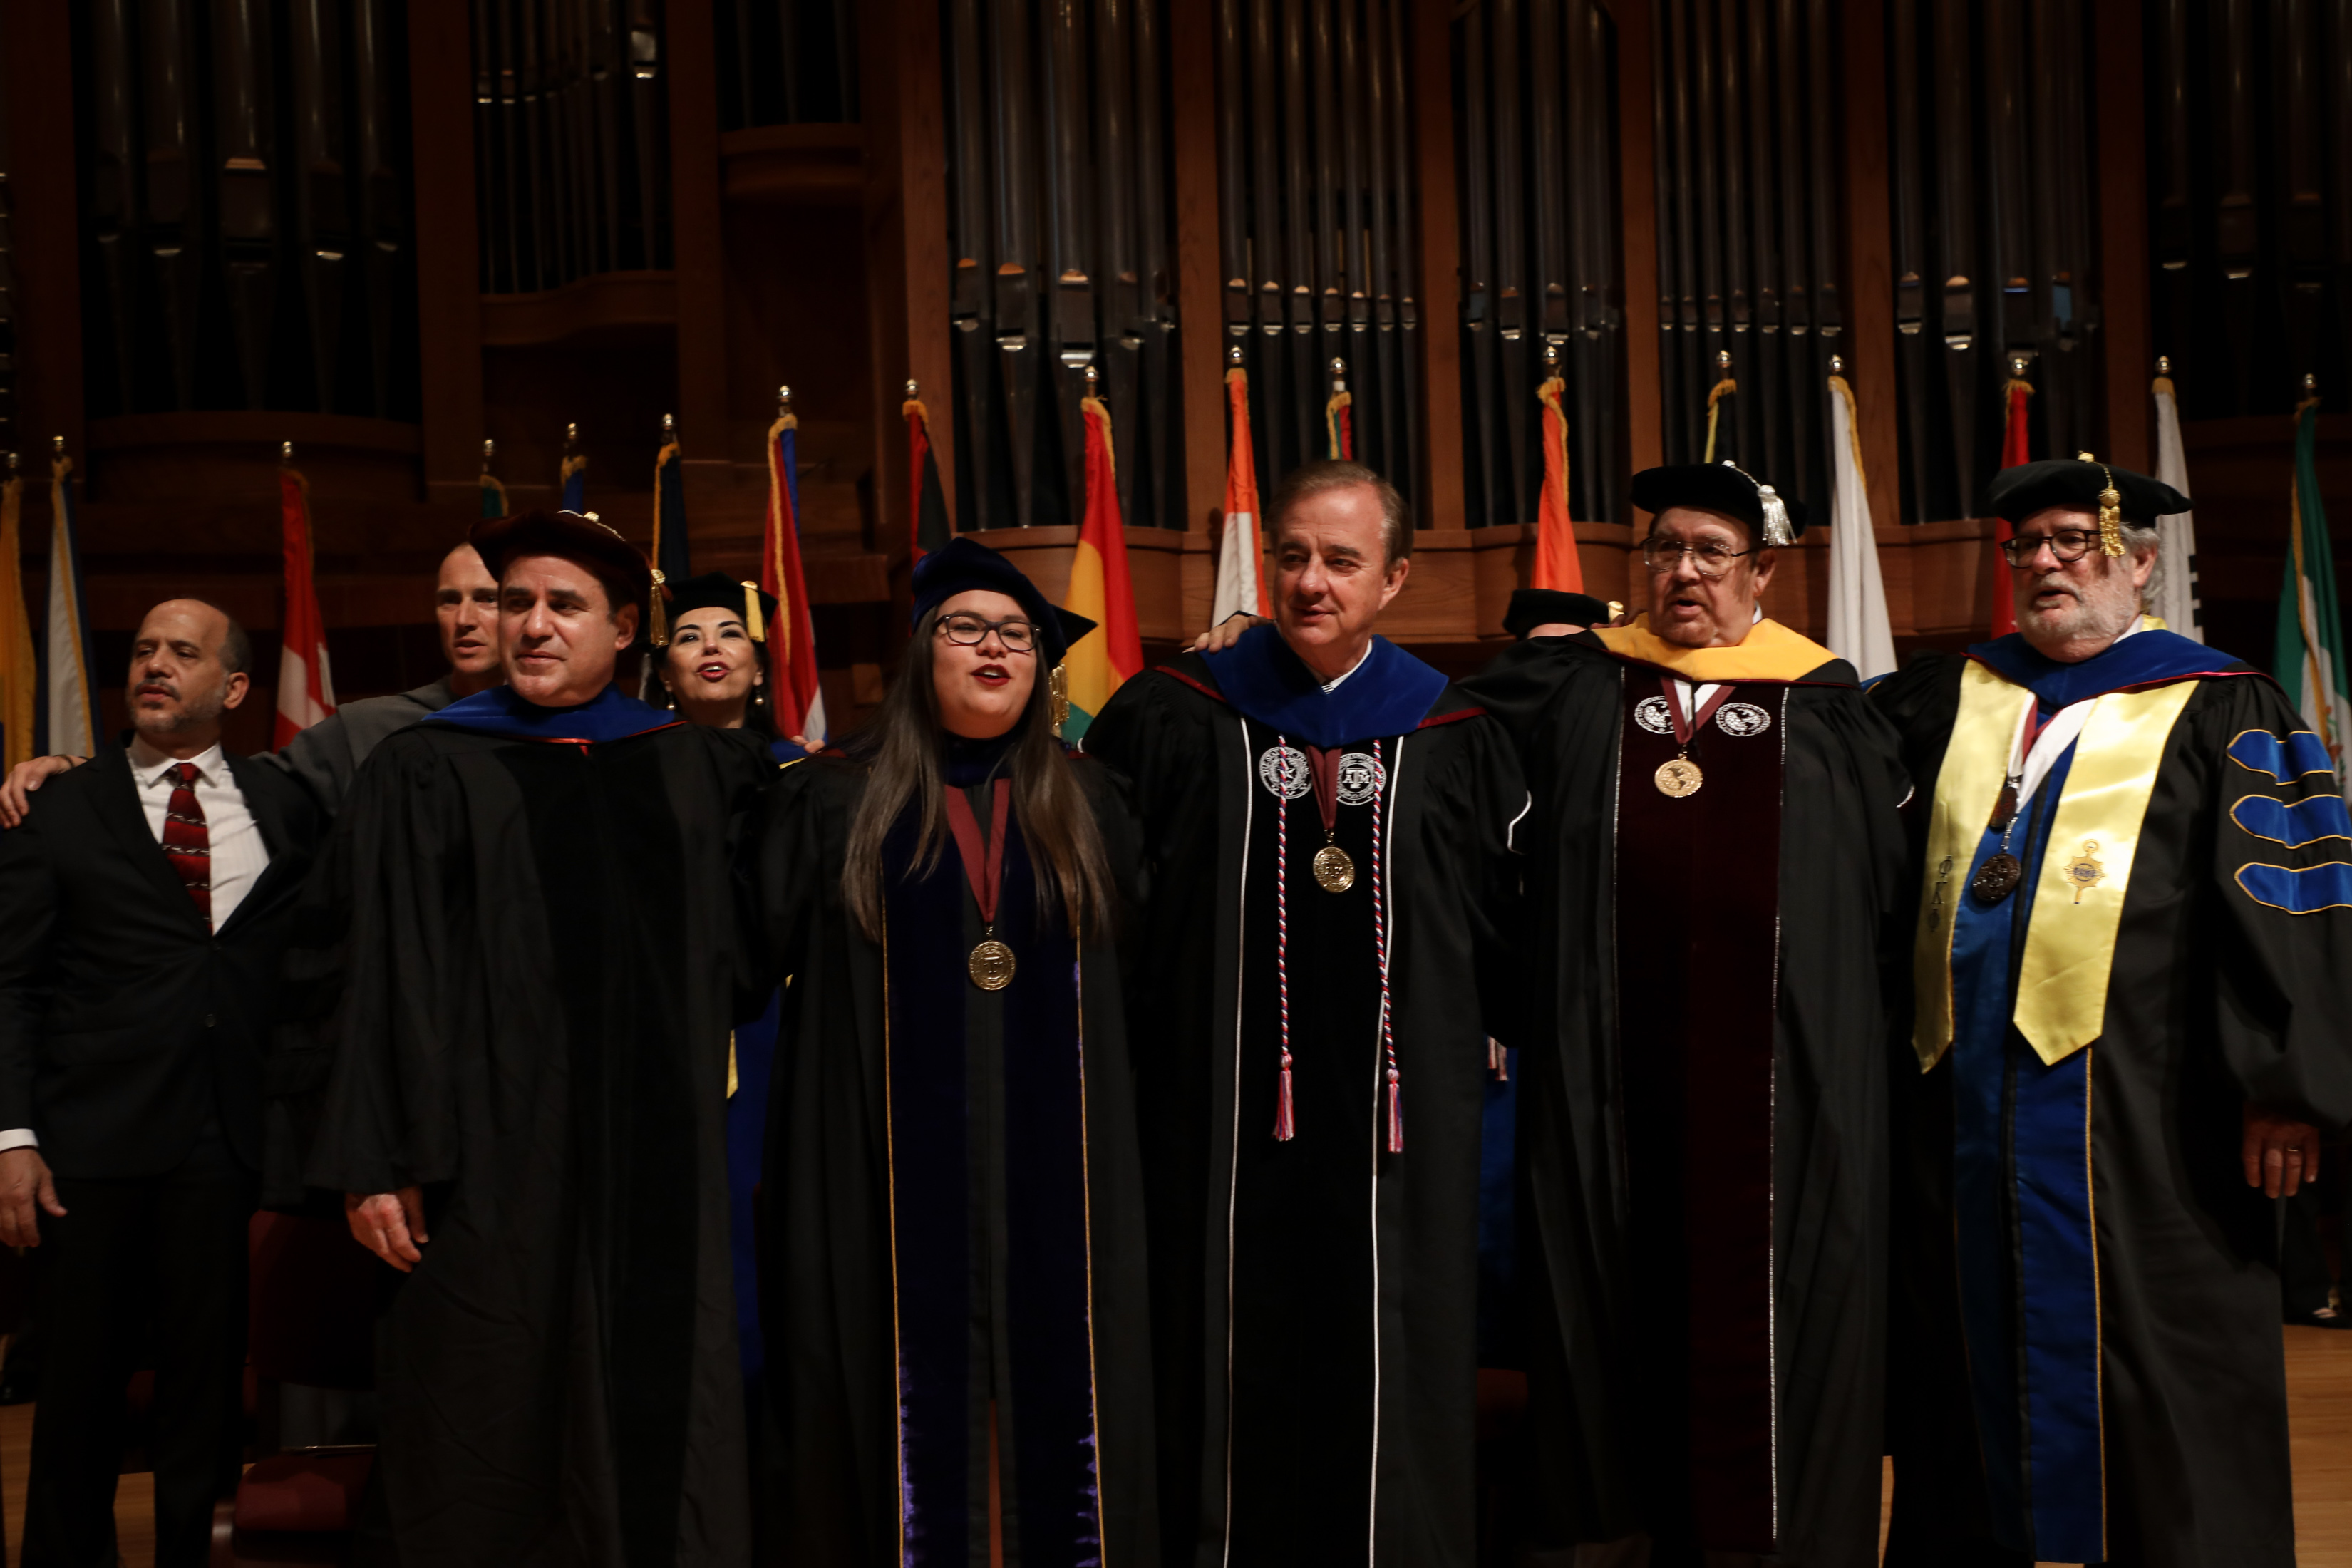 The Investiture Ceremony for Dr. Pablo Arenaz